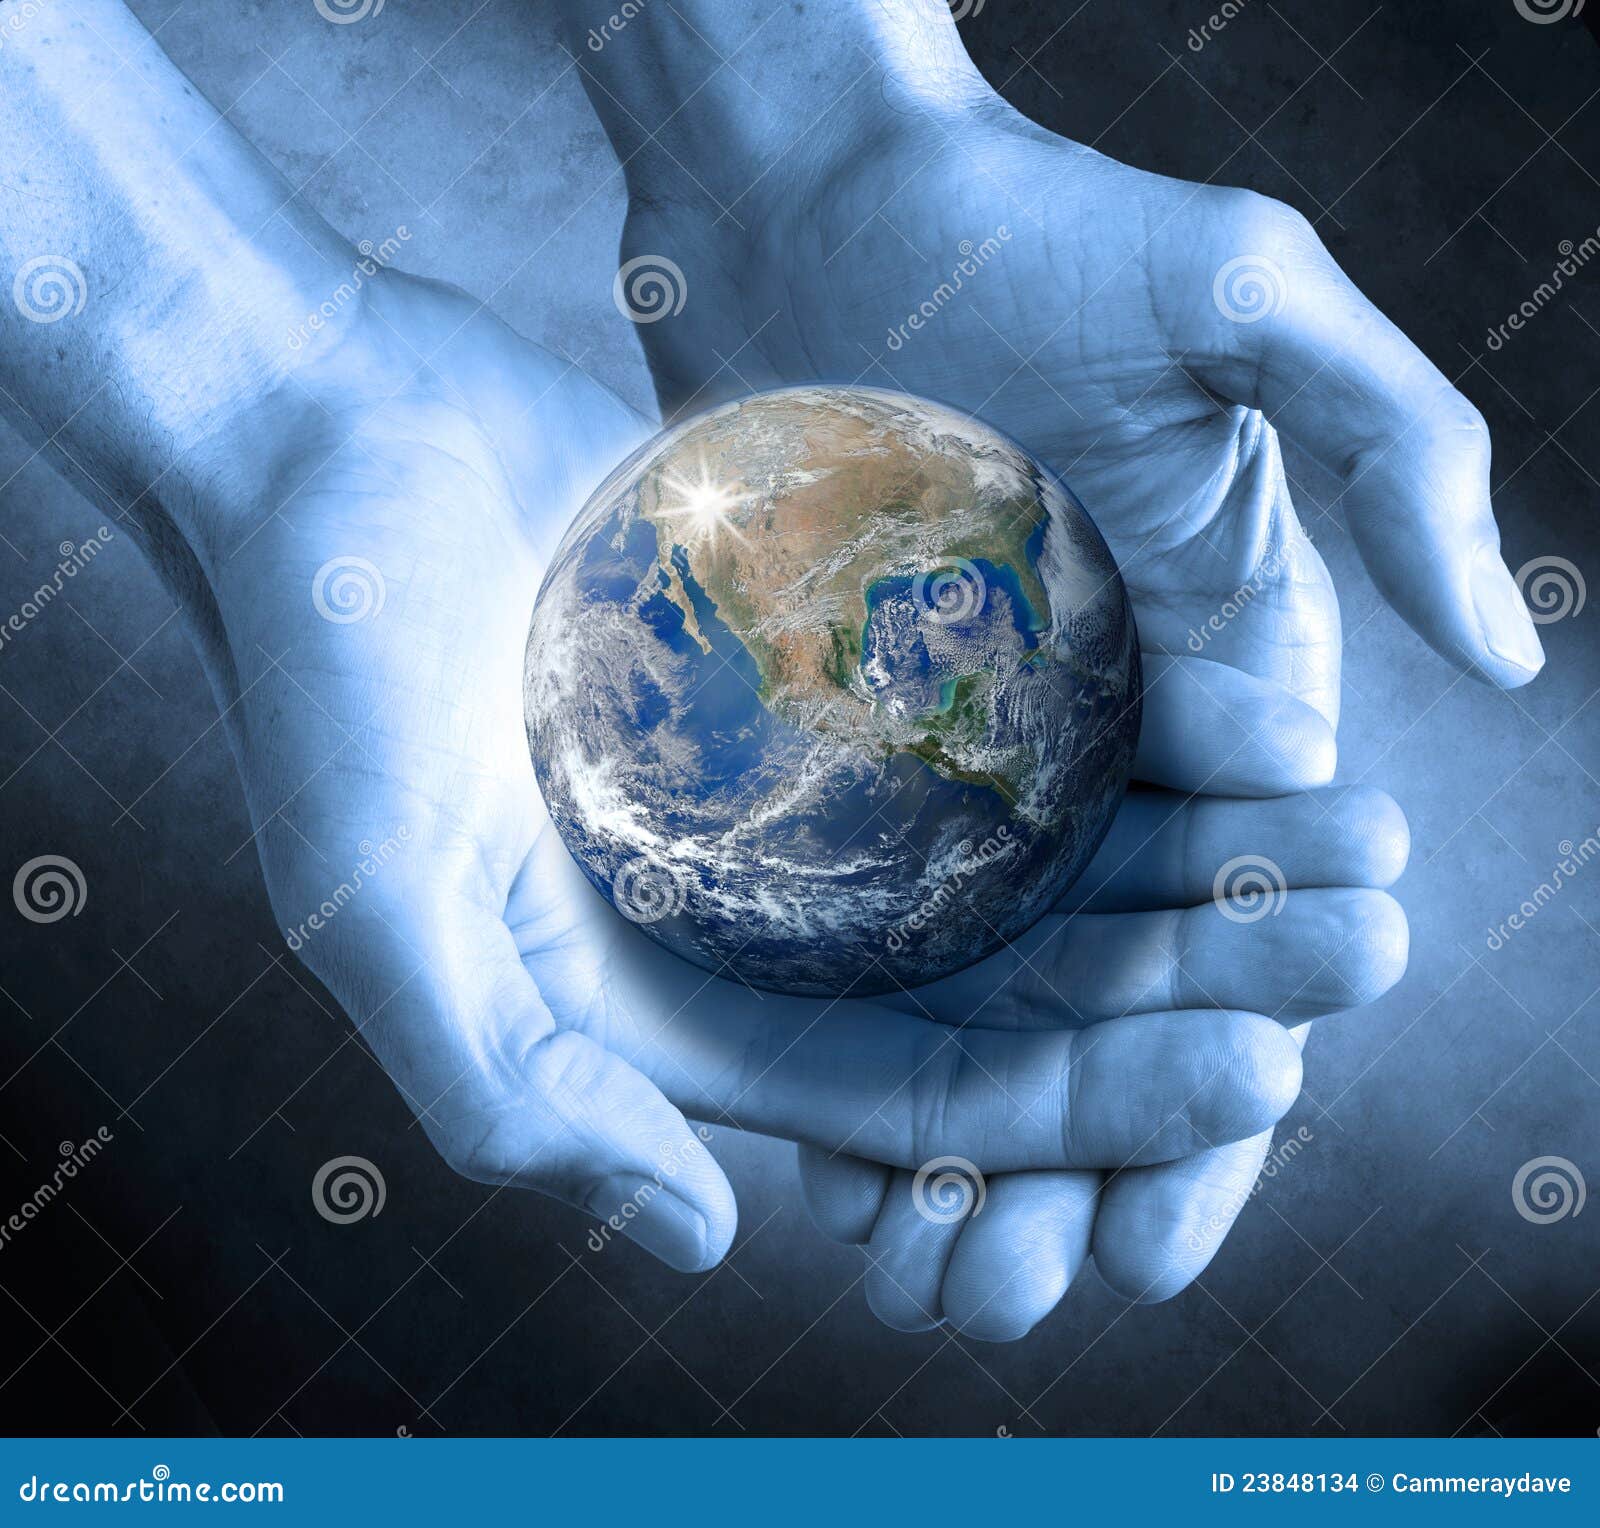 earth globe hands sustainable climate